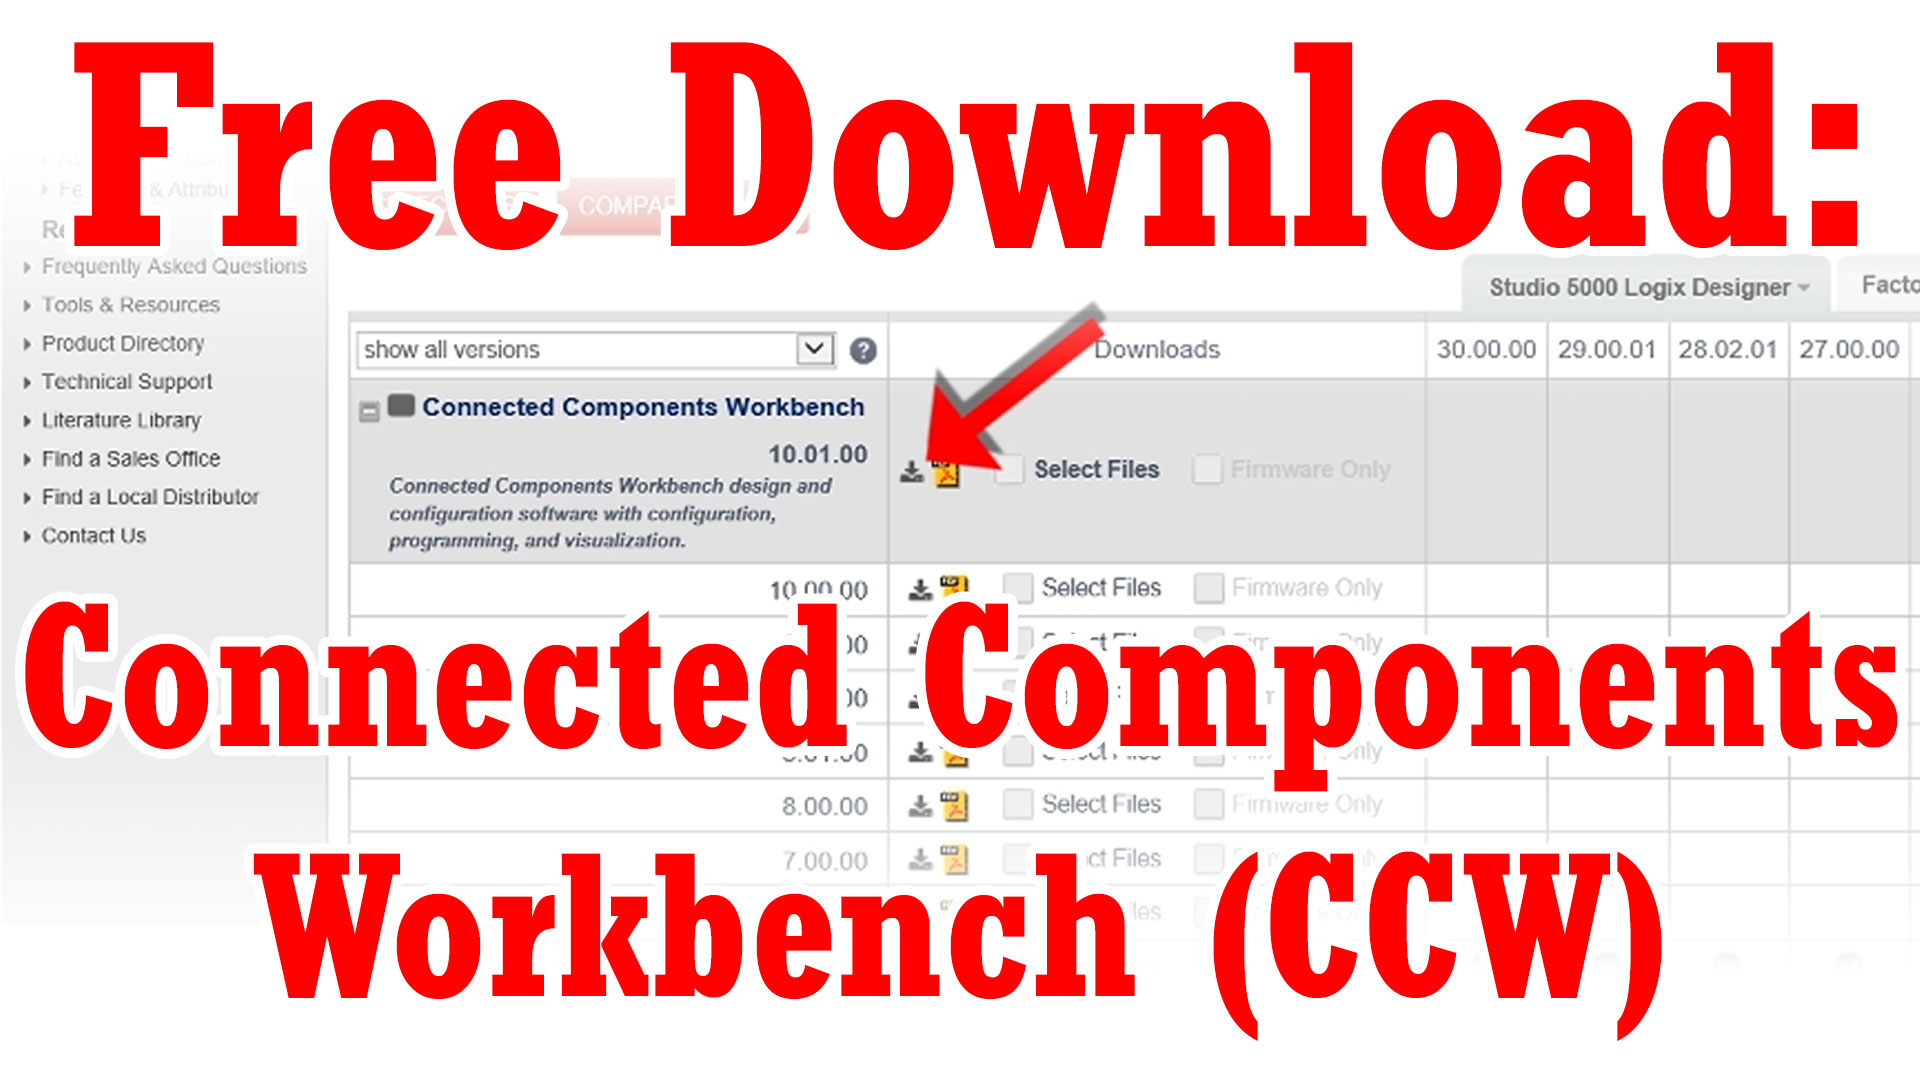 CCW - How to Download a free copy of Connected Components Workbench in 2017 (M3E20)